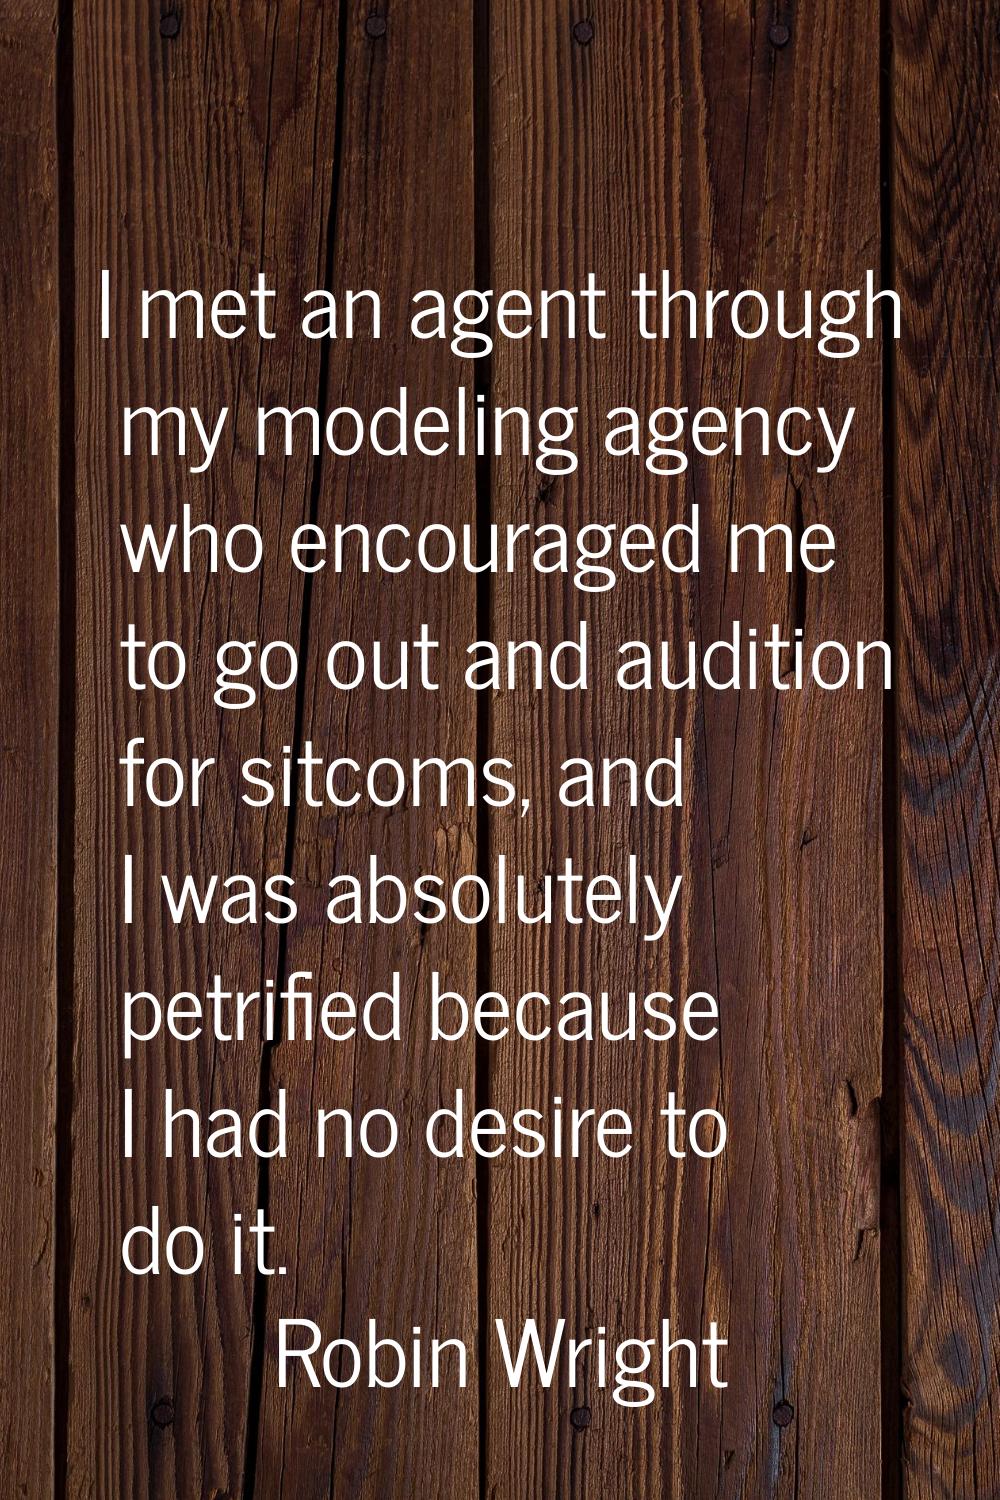 I met an agent through my modeling agency who encouraged me to go out and audition for sitcoms, and